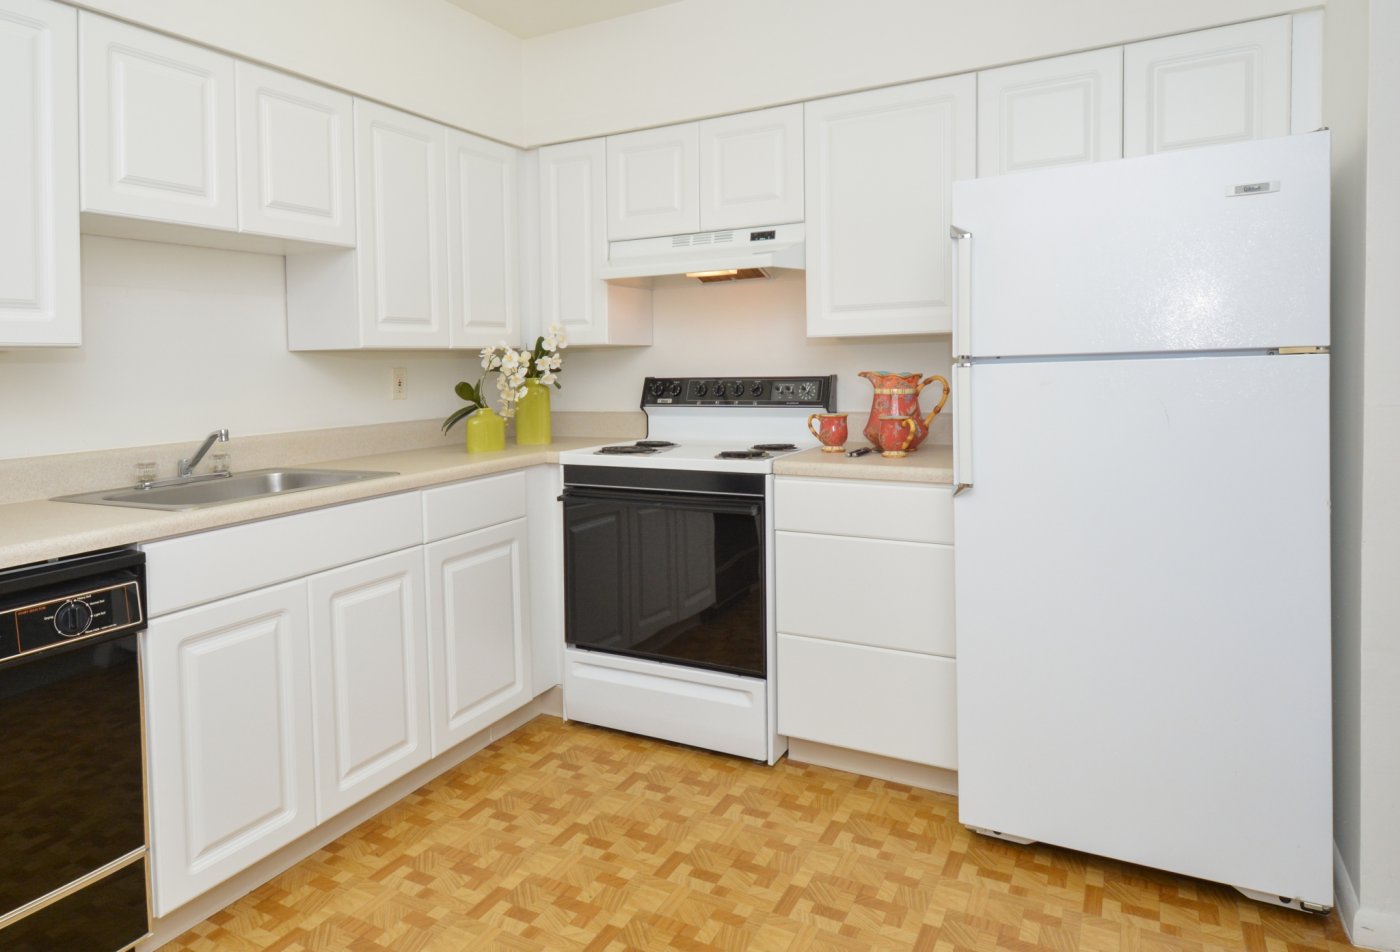 State-of-the-Art Kitchen | Lansdale PA Apartment Homes | Valley Stream Apartments